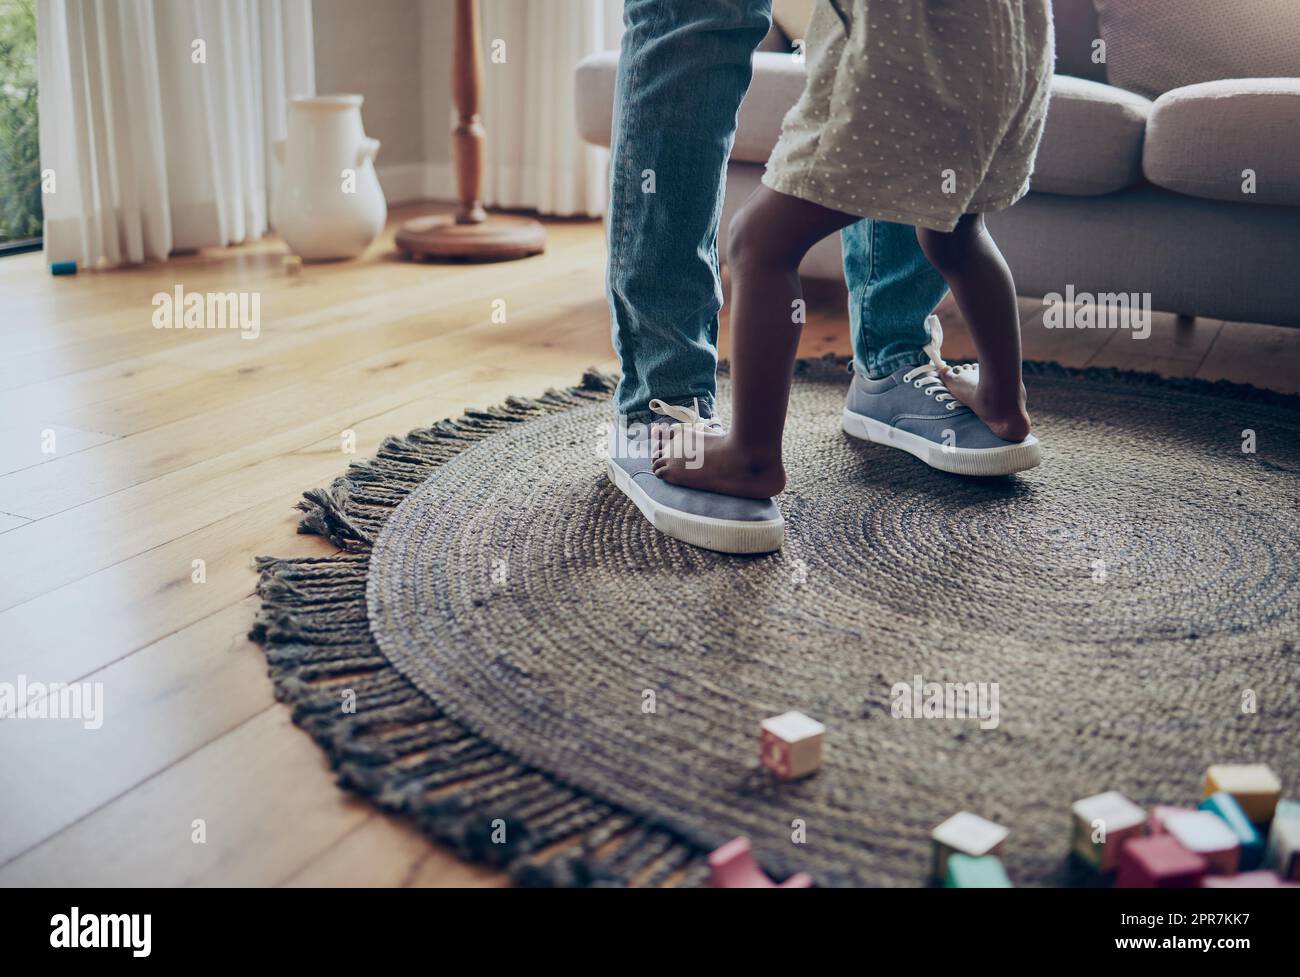 Lets dance. an unrecognizable parent and child dancing together at home. Stock Photo